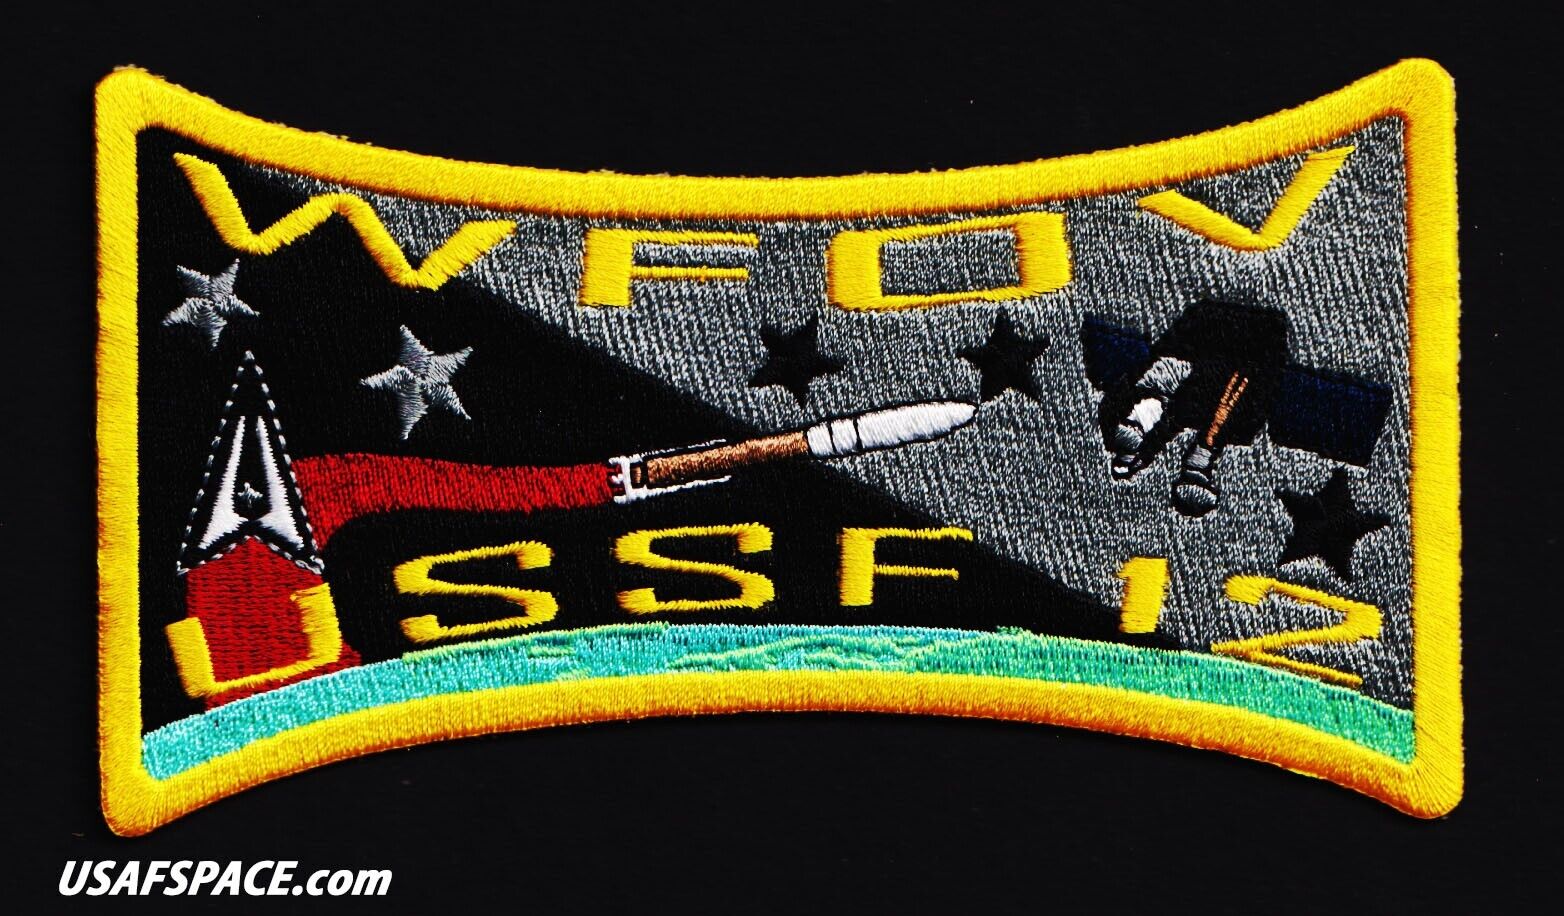 ORIGINAL USSF 12 -WFOV- ULA BOEING- Wide-Field-of-View -SATELLITE Mission PATCH